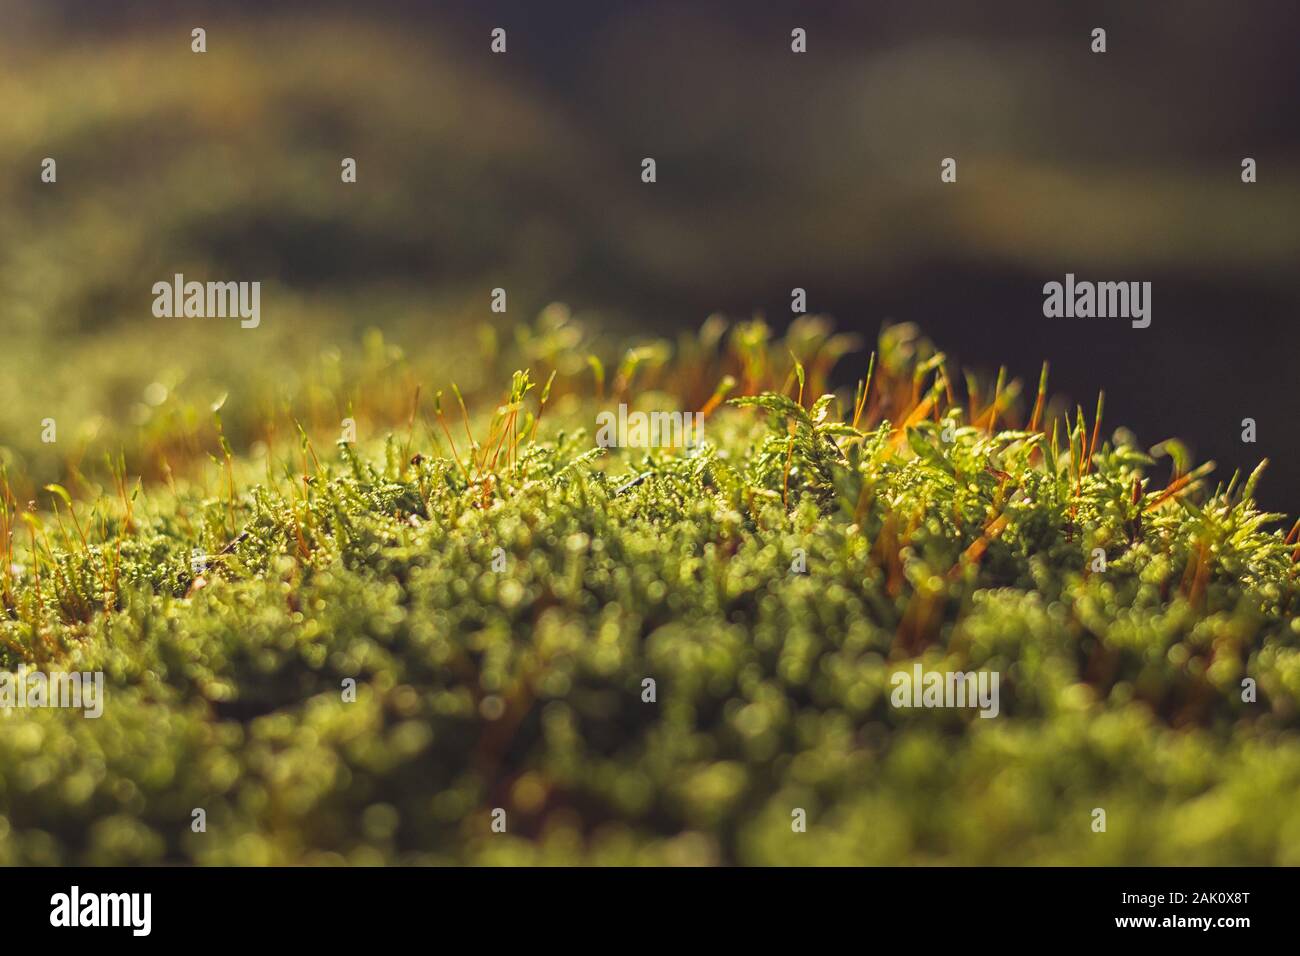 moss - close up view of green moss (illuminated by the sunlight) covering ground in dark forest Stock Photo